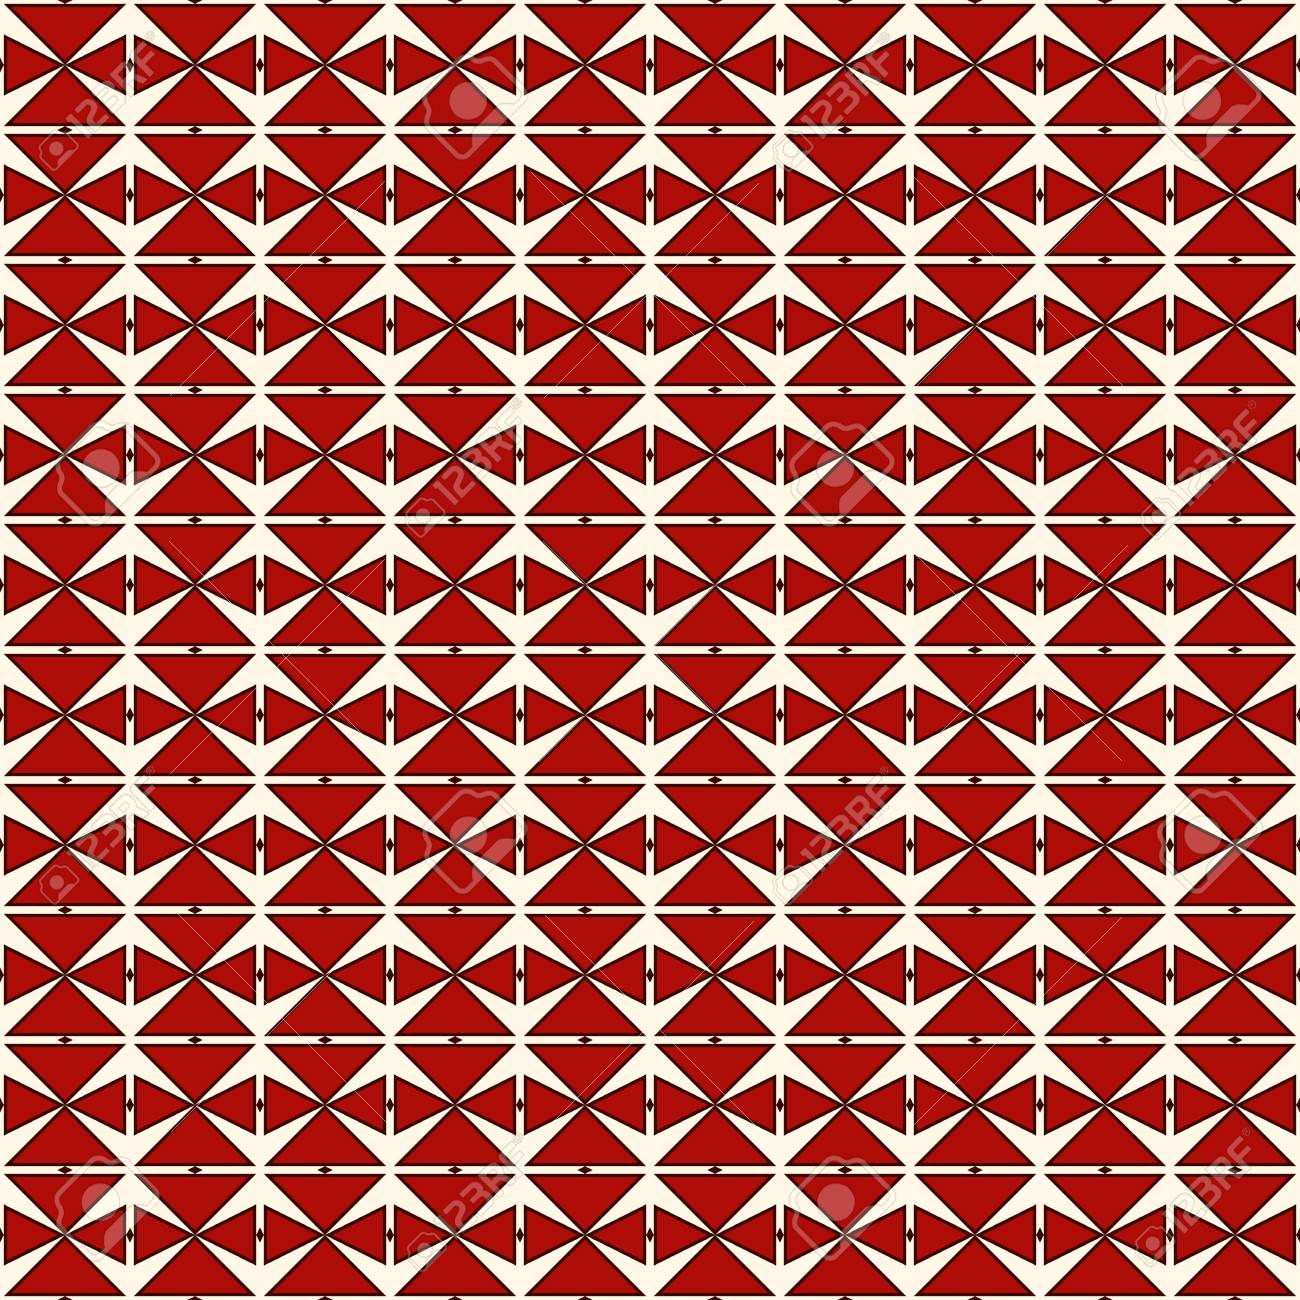 Repeated Diamonds And Lines Background Ethnic Wallpaper Seamless